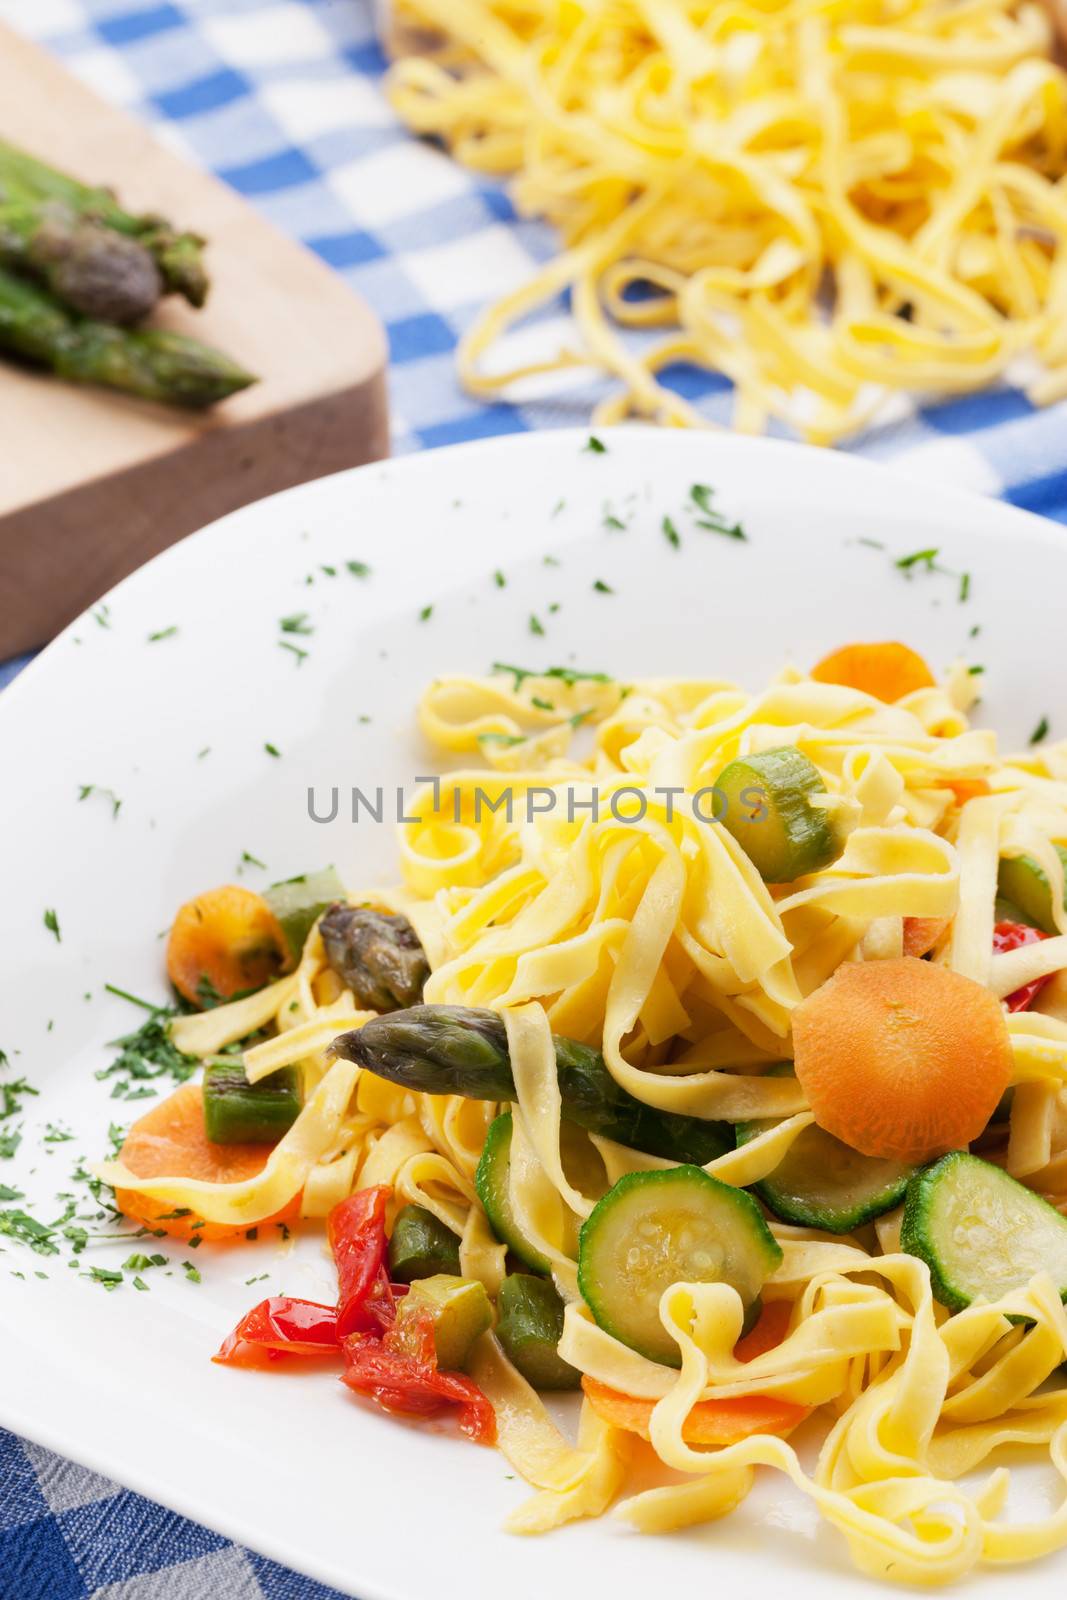 Tagliatelle with vegetables by stokkete